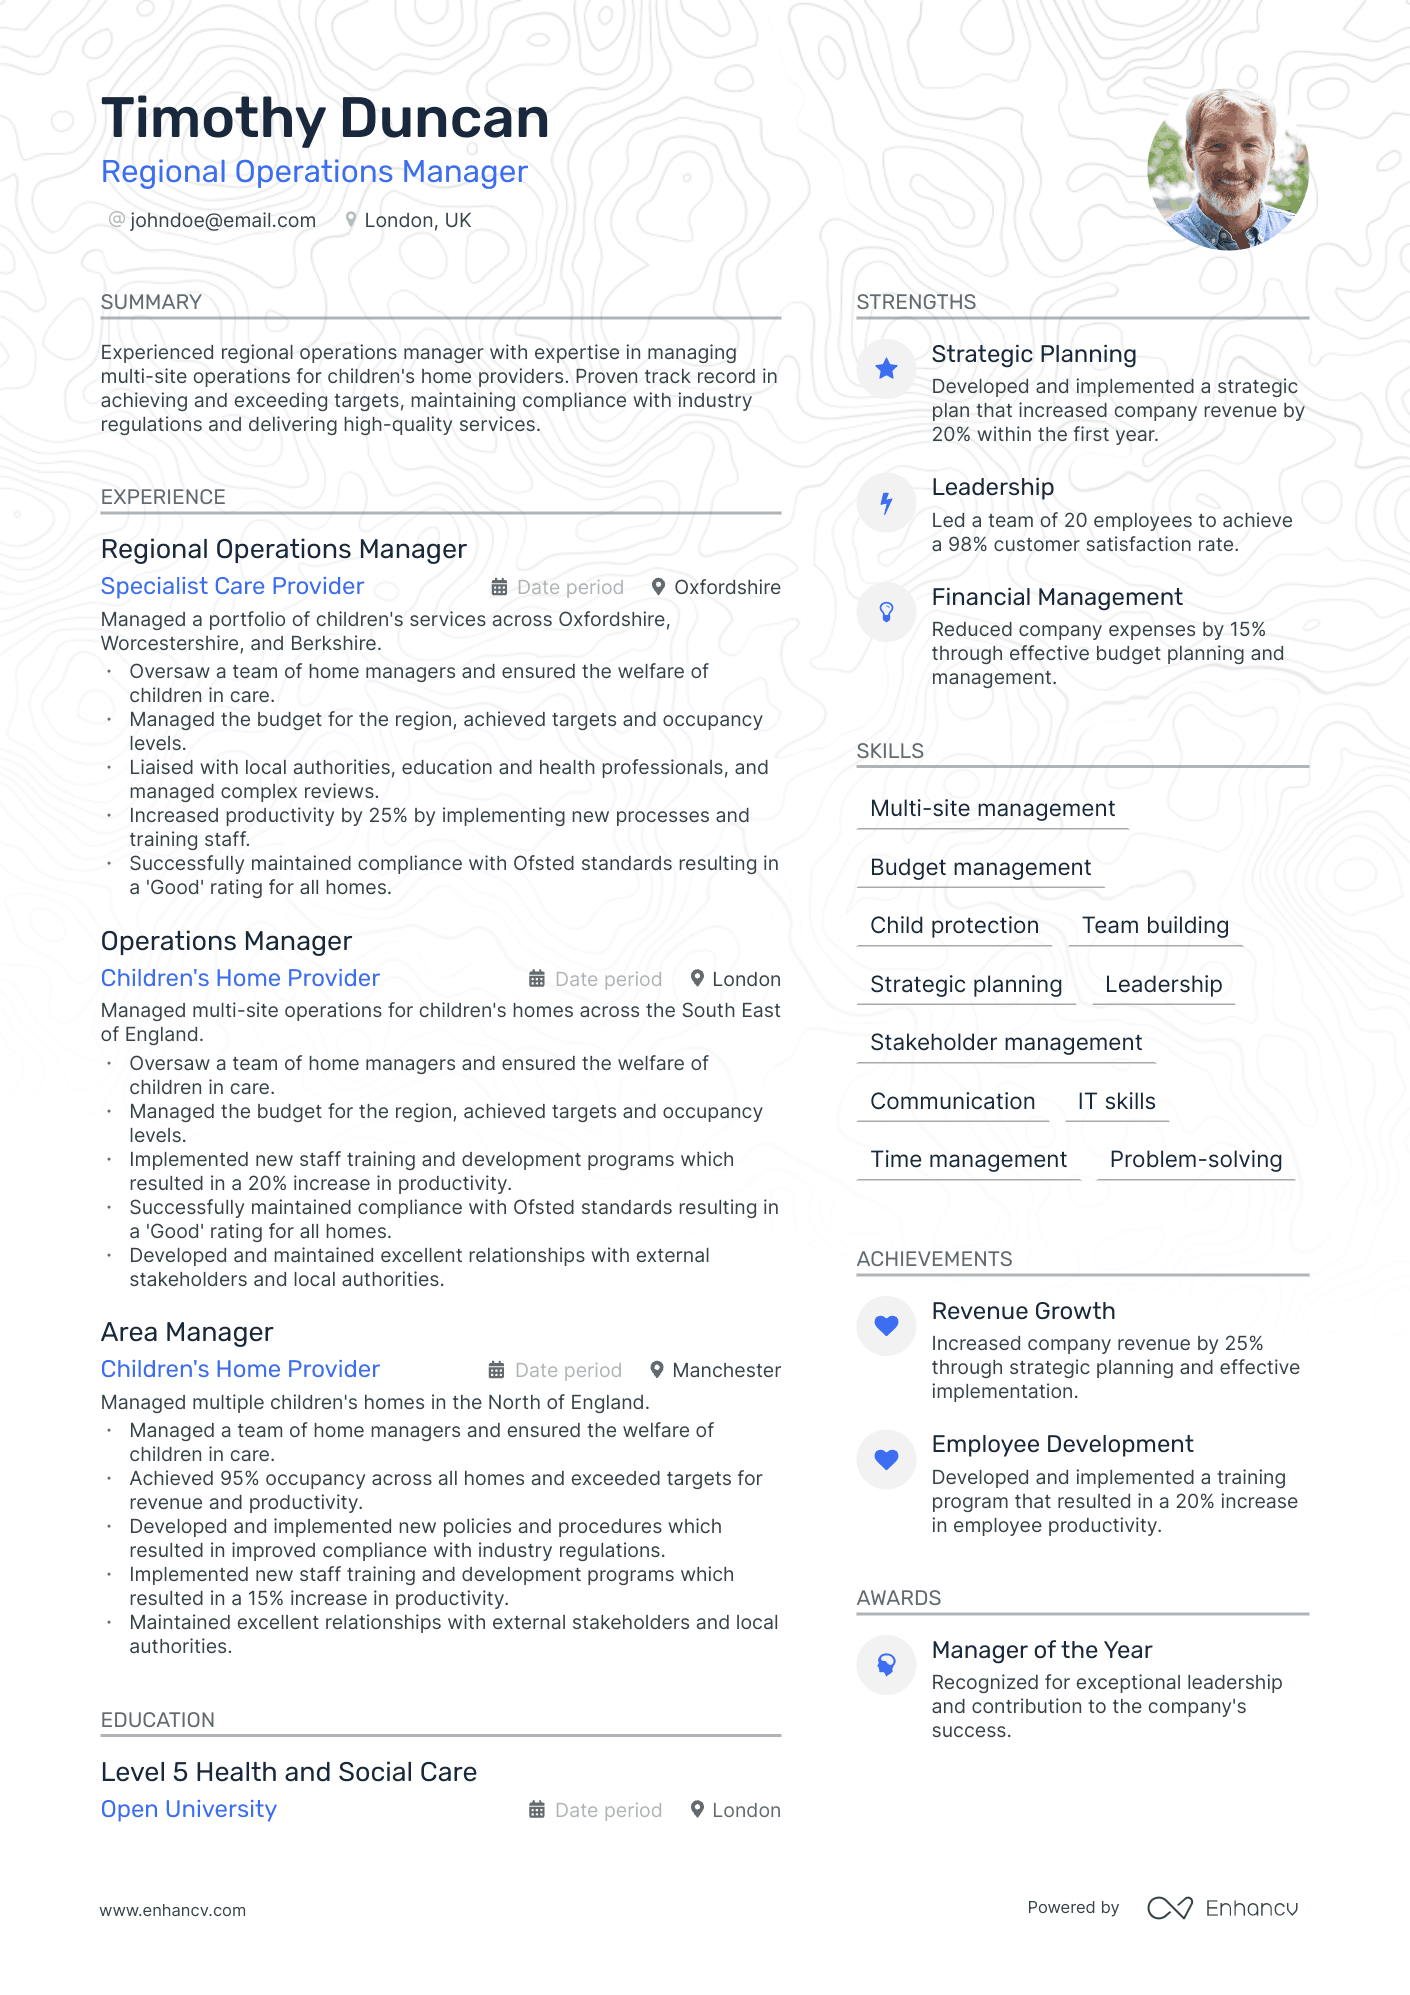 Regional Operations Manager resume example